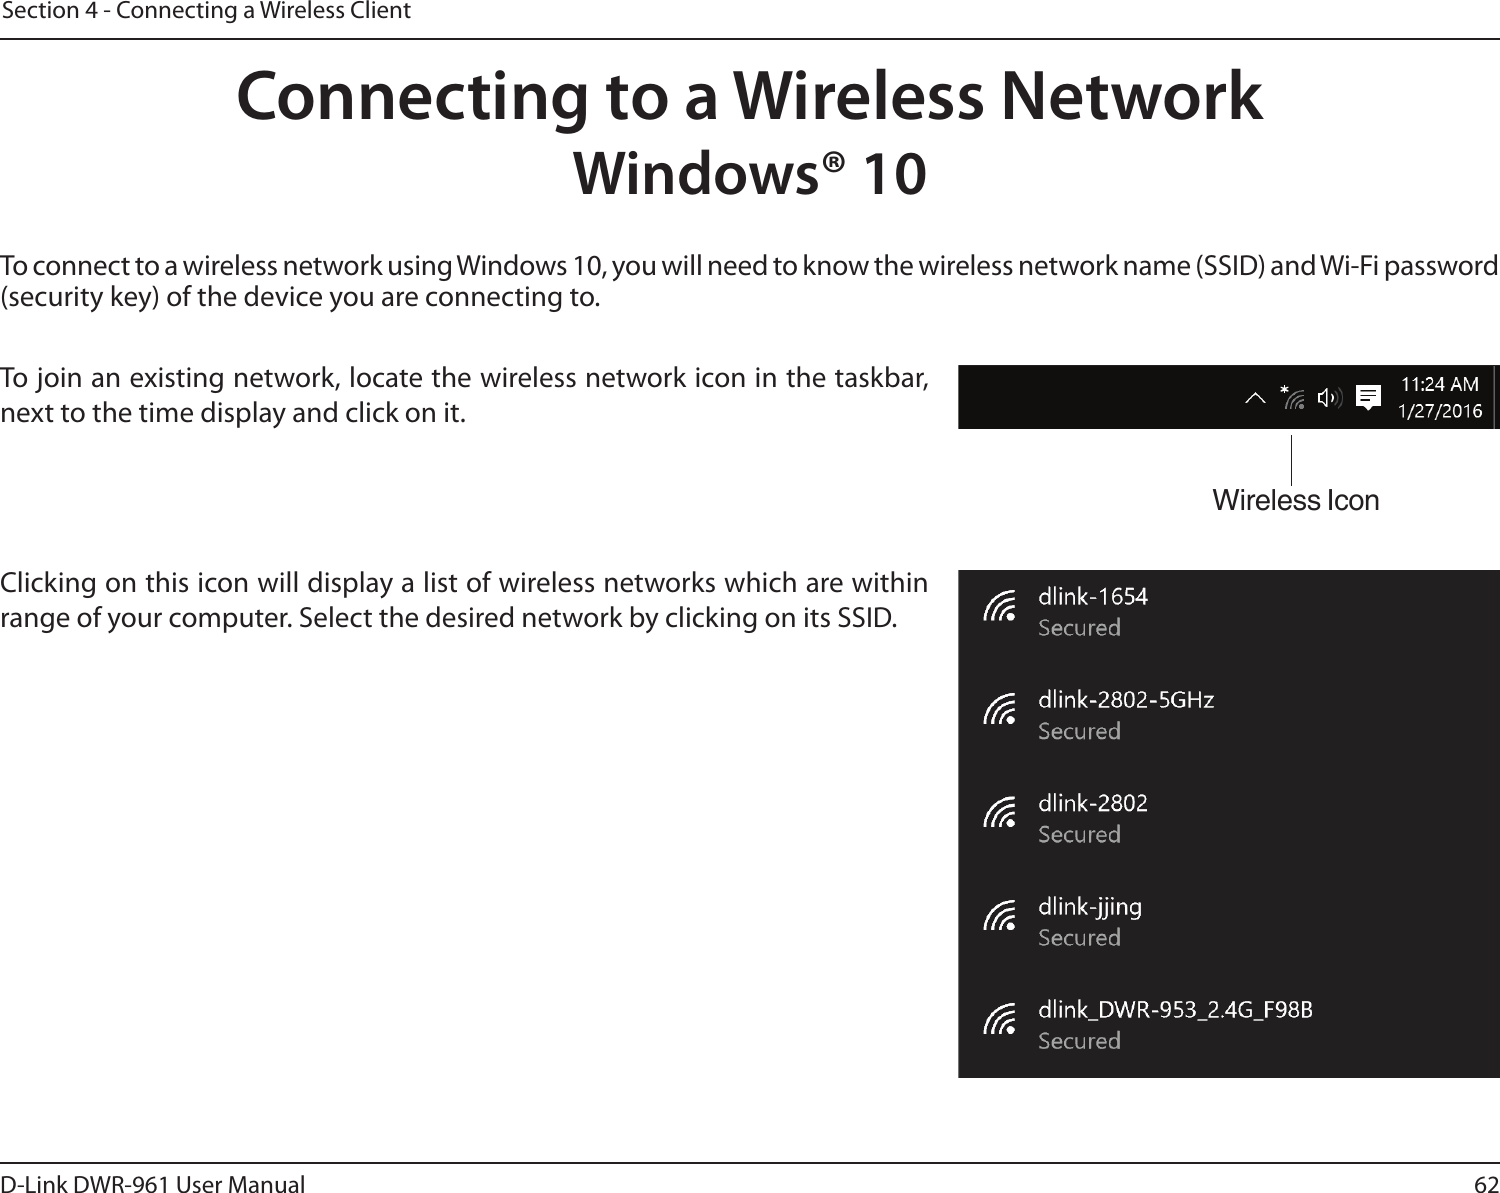 62D-Link DWR-961 User ManualSection 4 - Connecting a Wireless ClientTo connect to a wireless network using Windows 10, you will need to know the wireless network name (SSID) and Wi-Fi password (security key) of the device you are connecting to. To join an existing network, locate the wireless network icon in the taskbar, next to the time display and click on it. Wireless IconClicking on this icon will display a list of wireless networks which are within range of your computer. Select the desired network by clicking on its SSID.Connecting to a Wireless NetworkWindows® 10